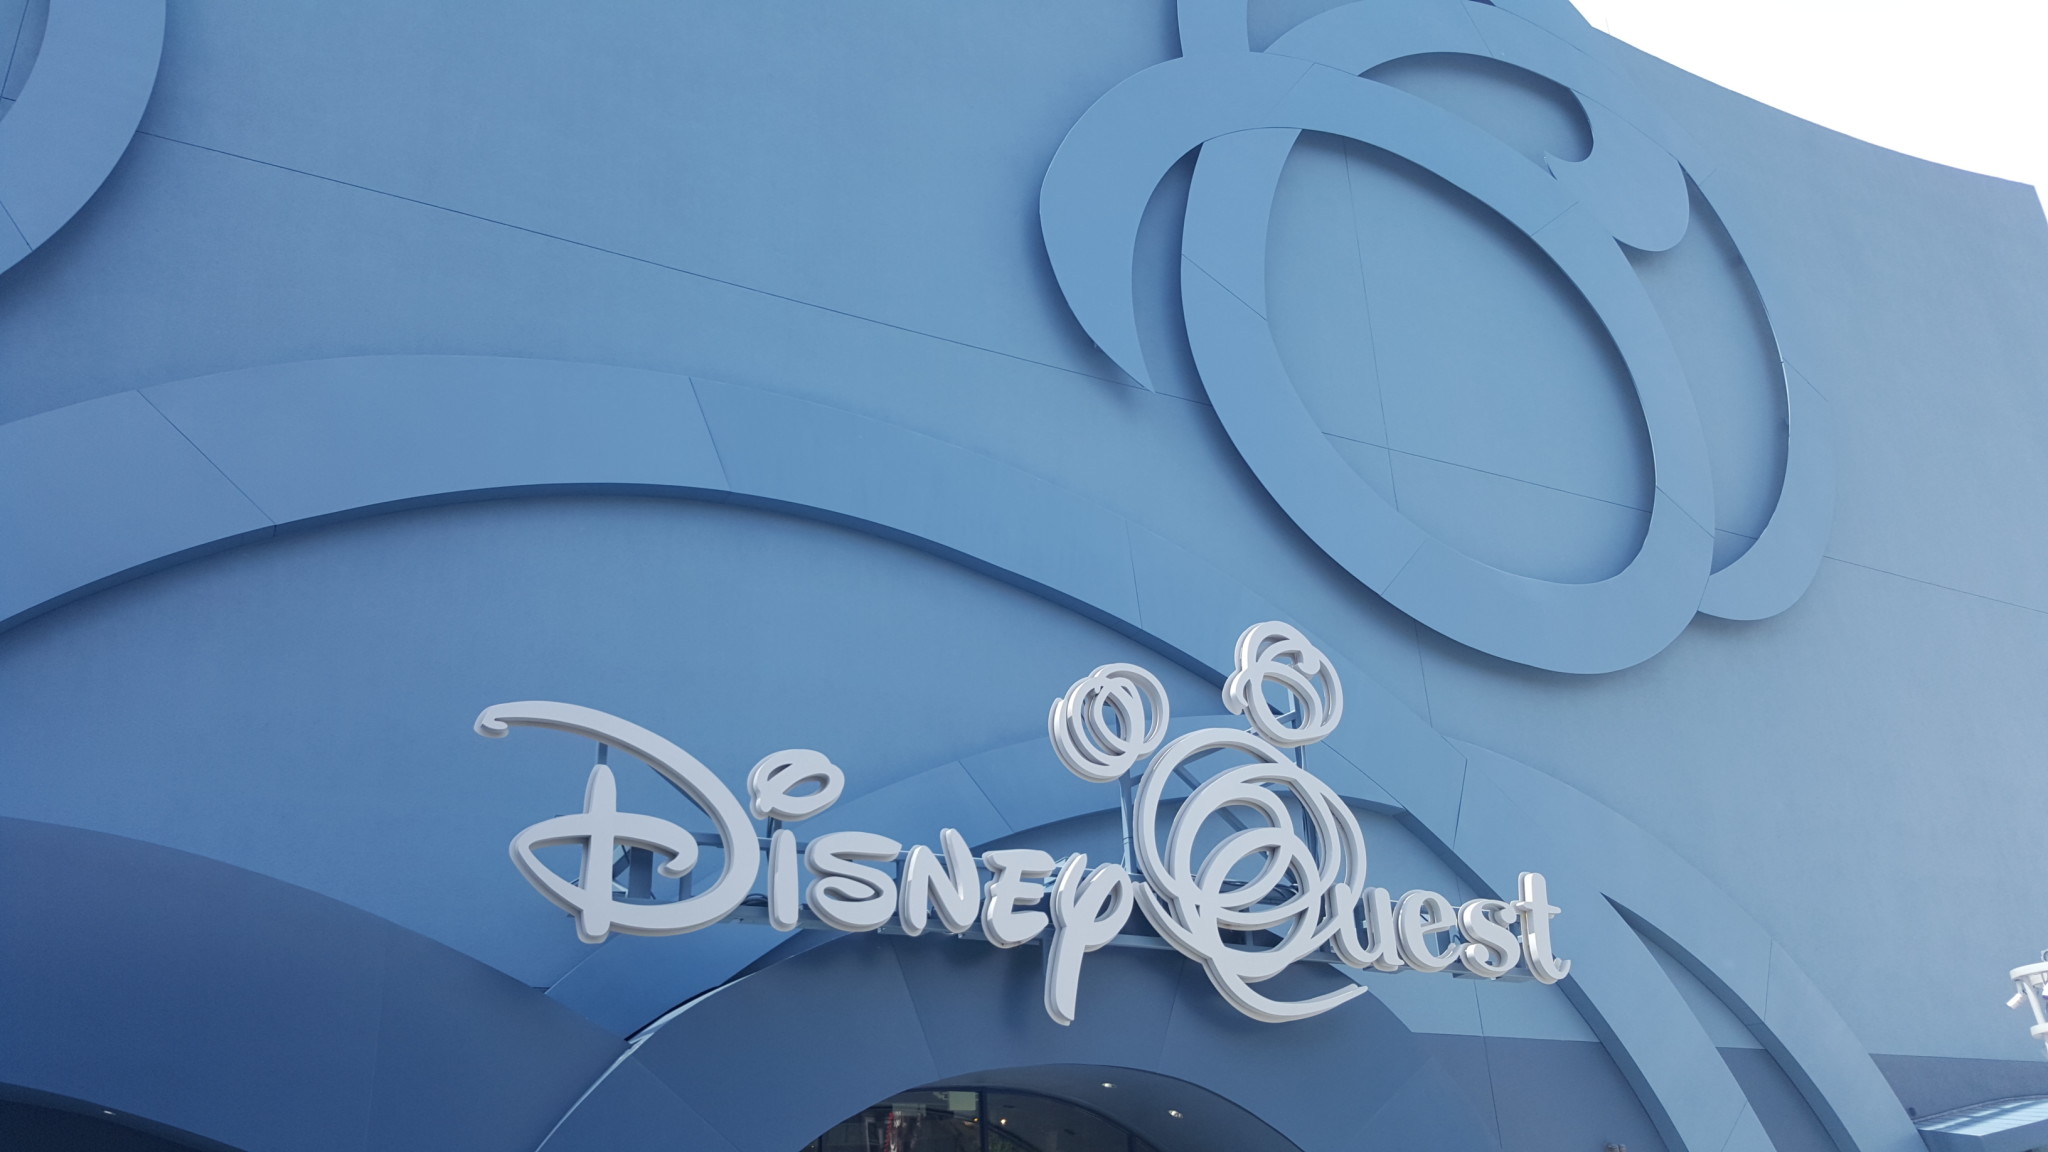 DisneyQuest Will be Closing to Make Room for The NBA Experience at Walt Disney World Resort